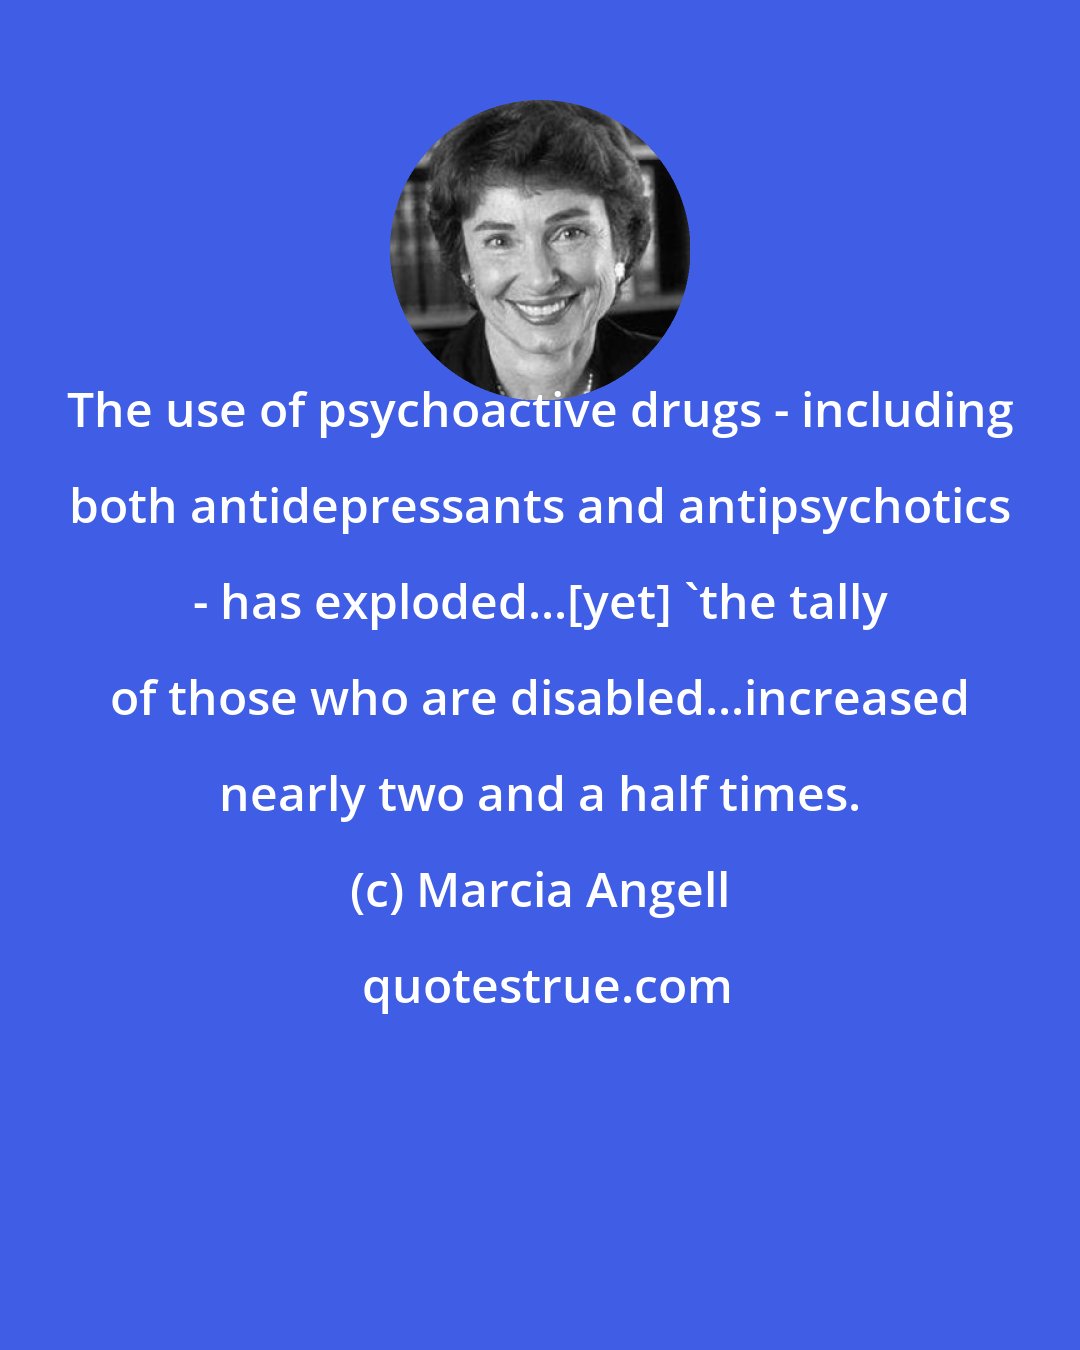 Marcia Angell: The use of psychoactive drugs - including both antidepressants and antipsychotics - has exploded...[yet] 'the tally of those who are disabled...increased nearly two and a half times.